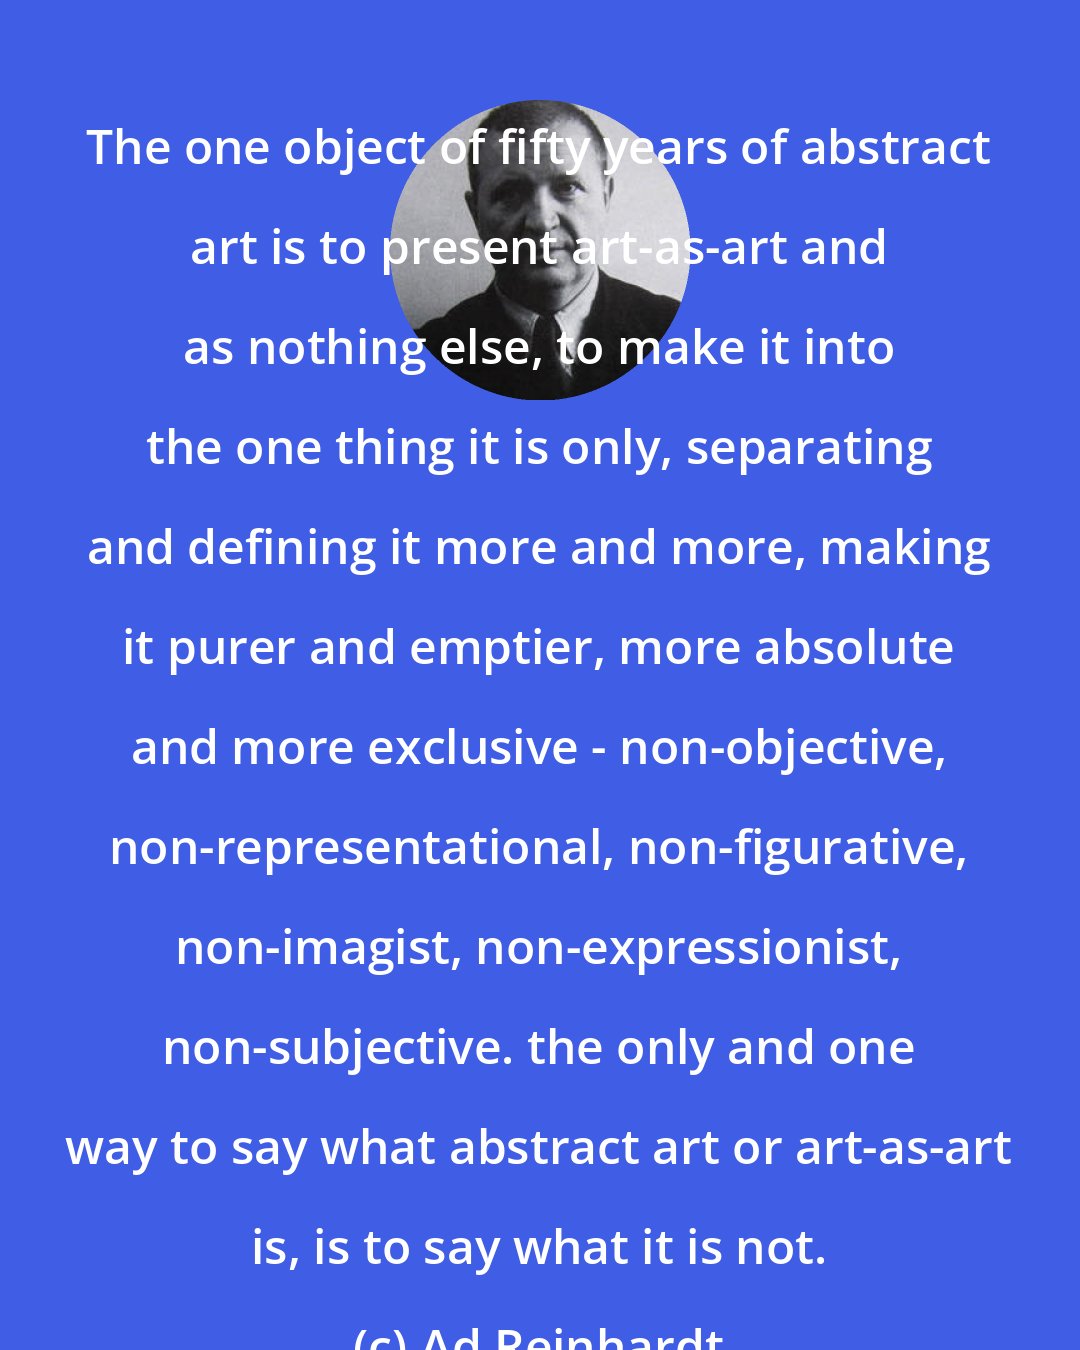 Ad Reinhardt: The one object of fifty years of abstract art is to present art-as-art and as nothing else, to make it into the one thing it is only, separating and defining it more and more, making it purer and emptier, more absolute and more exclusive - non-objective, non-representational, non-figurative, non-imagist, non-expressionist, non-subjective. the only and one way to say what abstract art or art-as-art is, is to say what it is not.